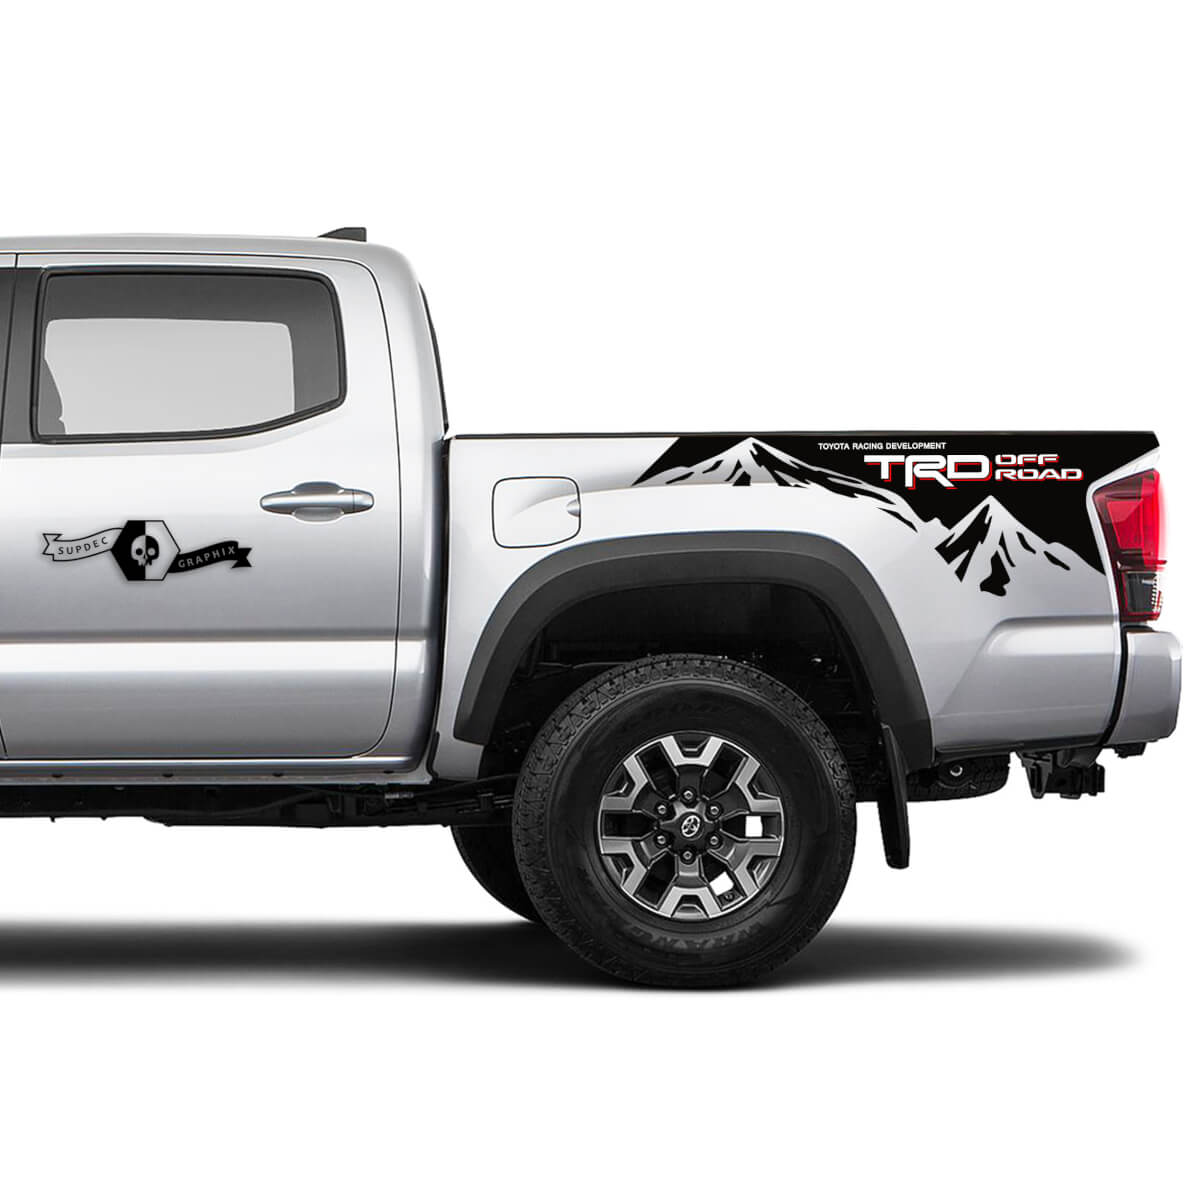 2 TOYOTA TRD SPORT Decals Vinyl Stickers 1 PAIR truck bed Tacoma Tundra 4 Runner